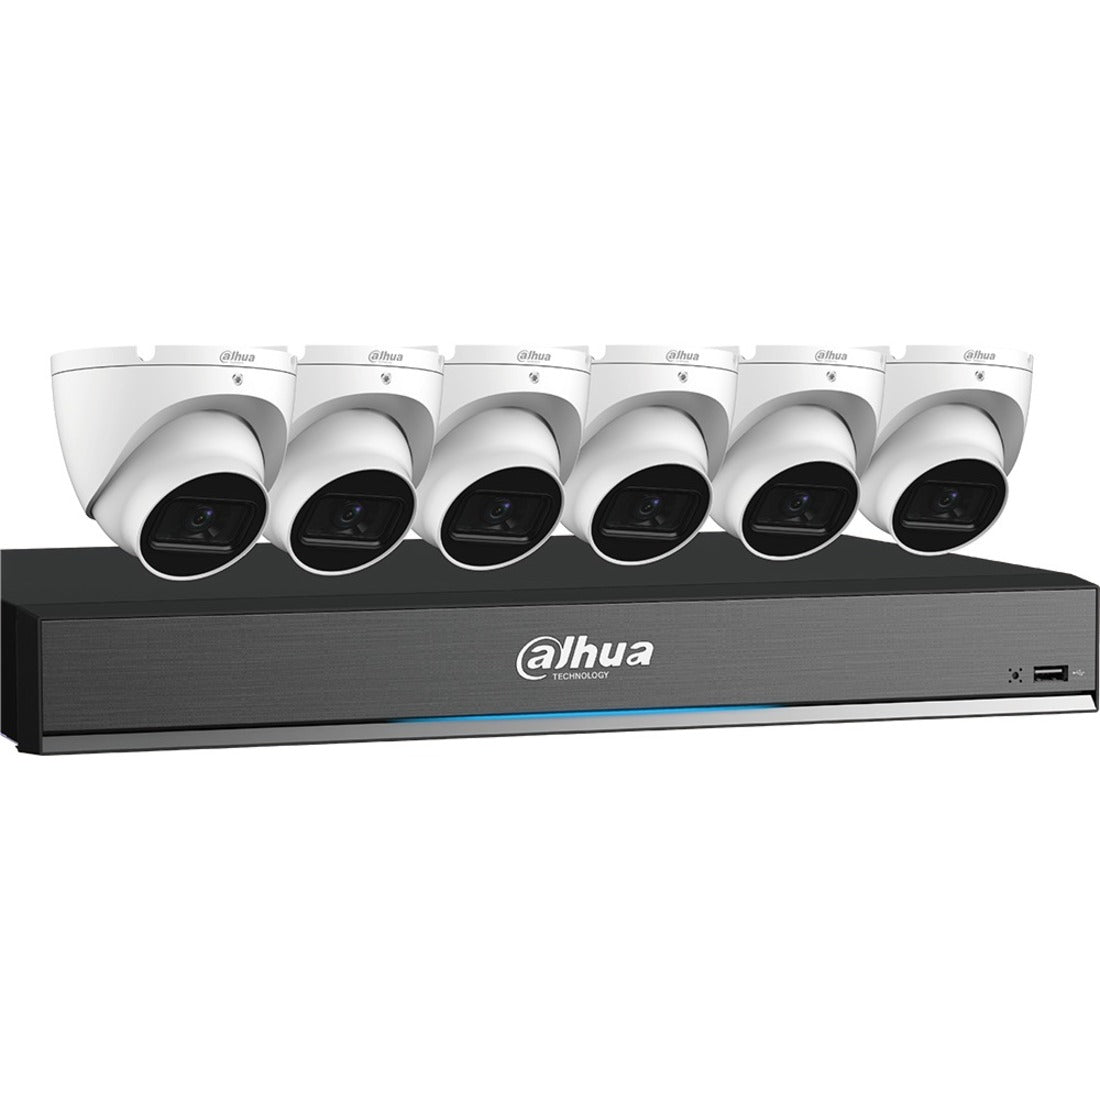 Dahua C888E64A 4K 8-channel HDCVI Security System, Night Vision, 8MP Resolution, Remote Management